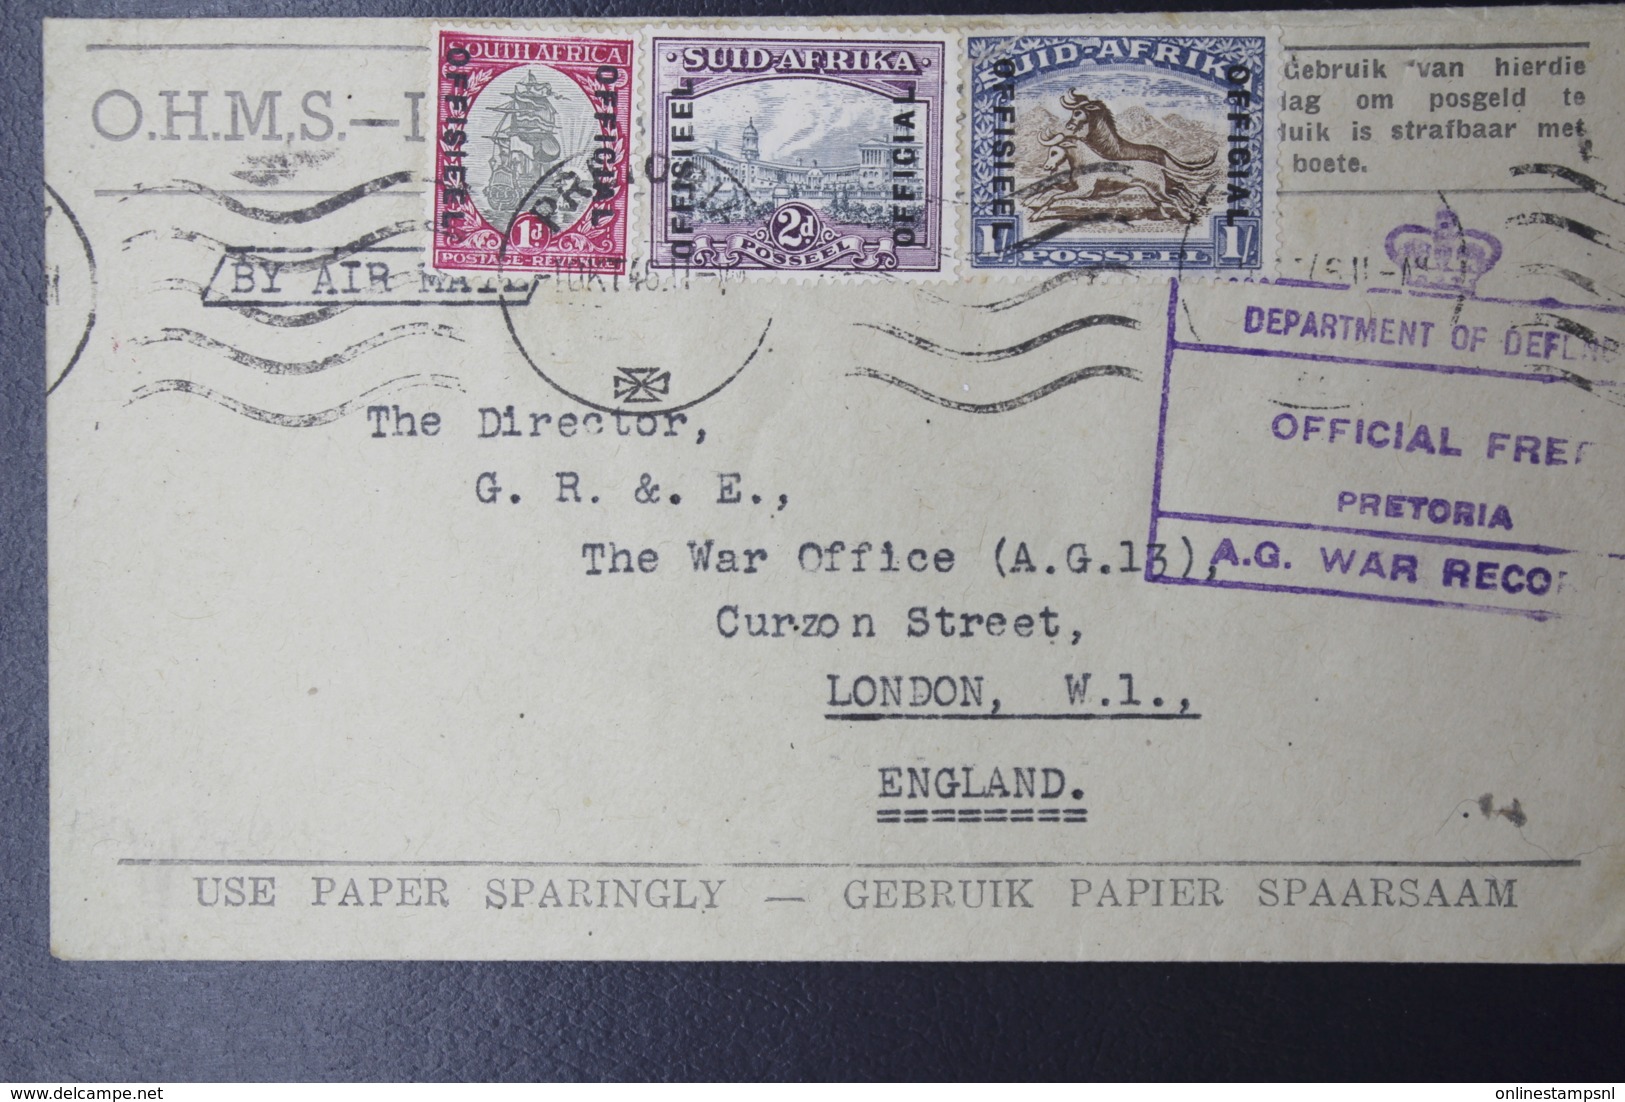 South Africa: OHMS Cover Ministry Of Defence Pretoria To London Mixed Franking , By Air Mail 1946 - Covers & Documents